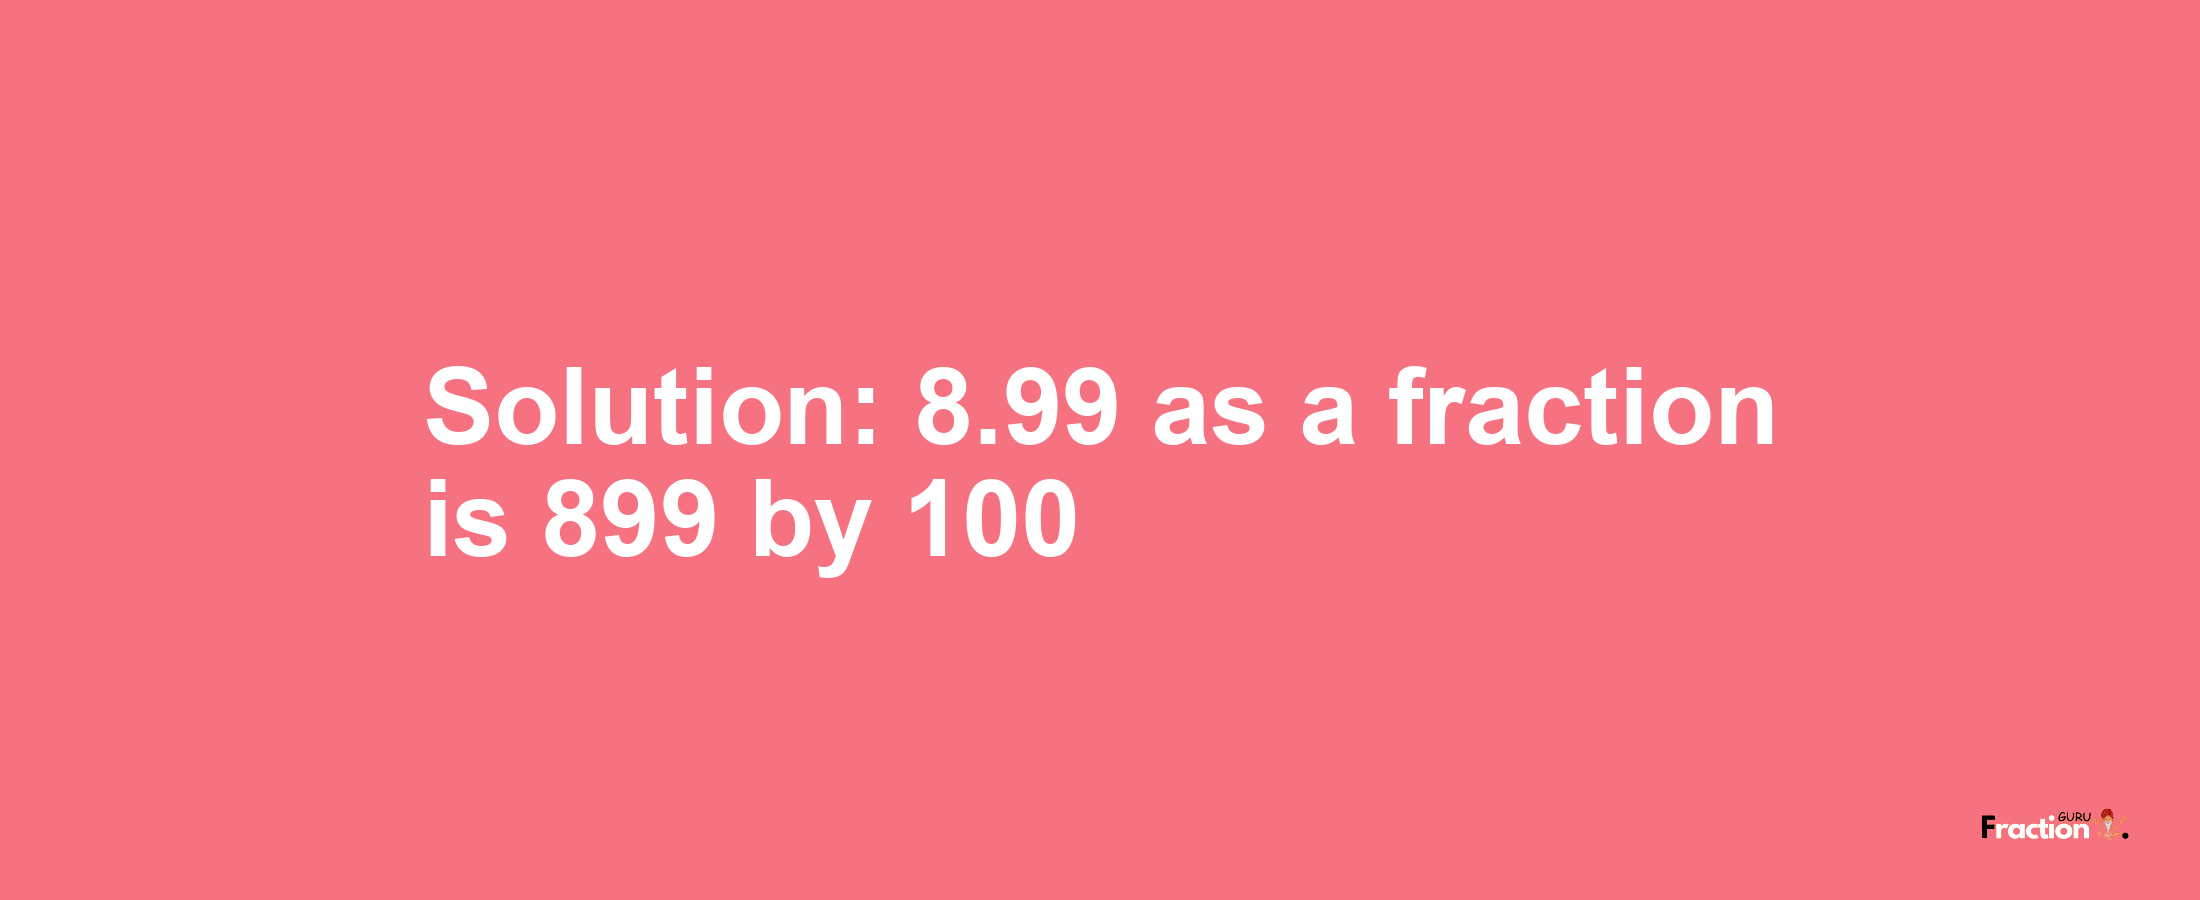 Solution:8.99 as a fraction is 899/100